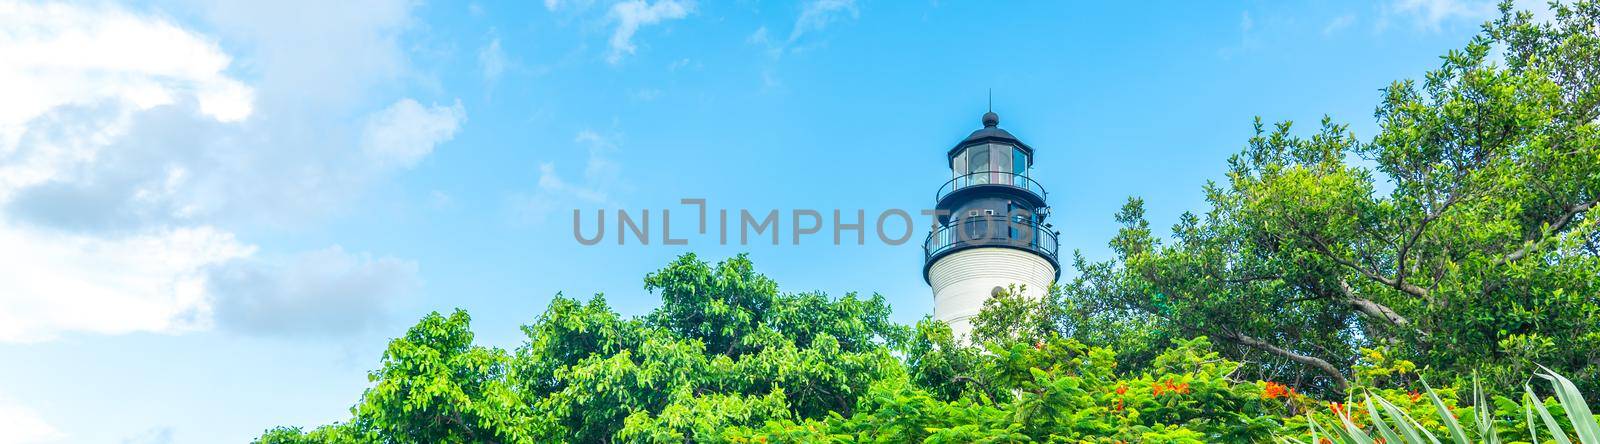 Lighthouse is a symbol of Key west in Florida